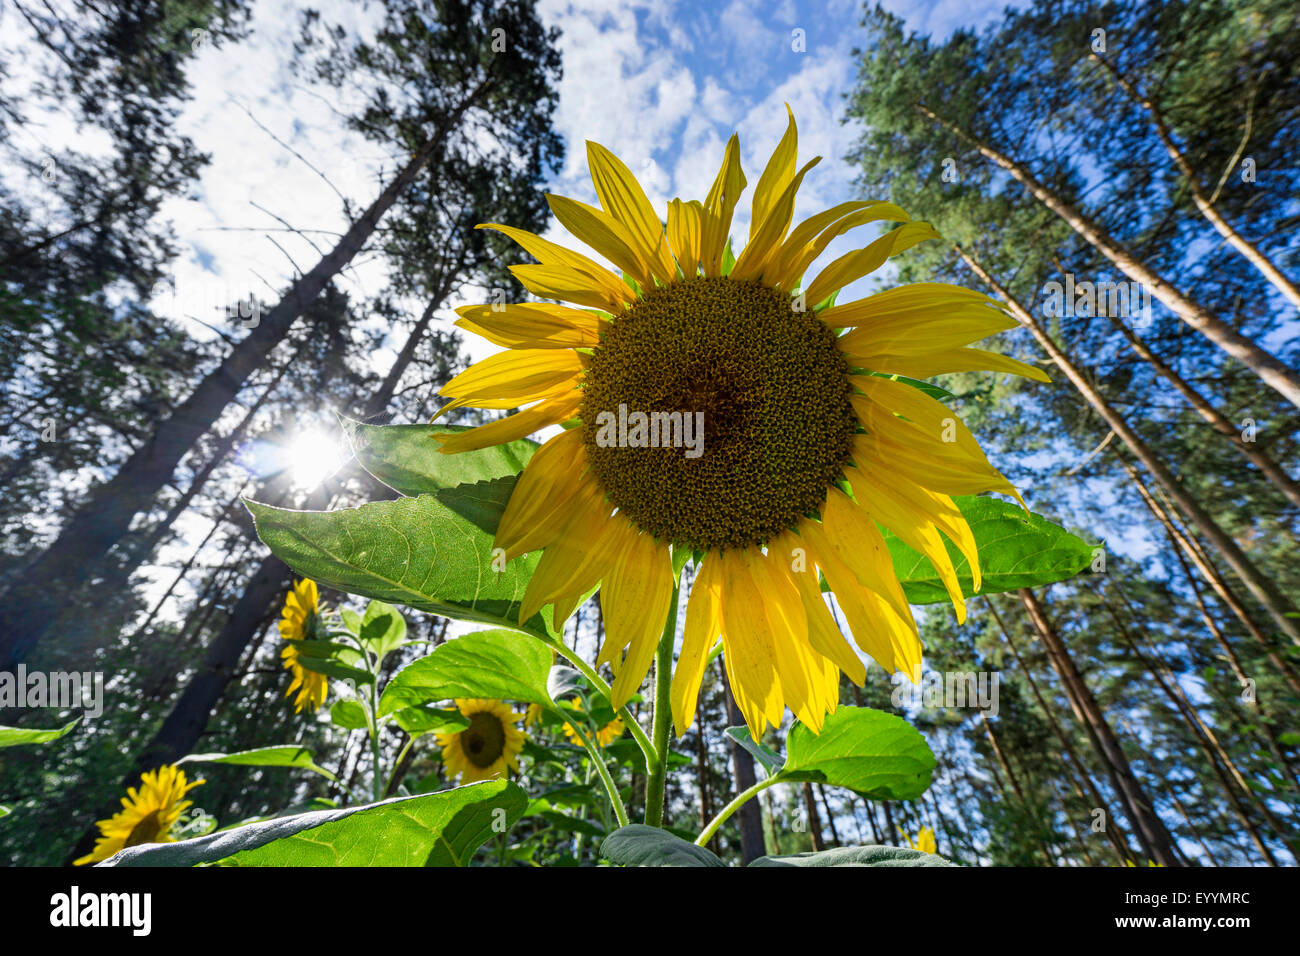 common sunflower (Helianthus annuus), sunflowers from worms-eye view in fornt of coniferous forest, Germany, Brandenburg Stock Photo